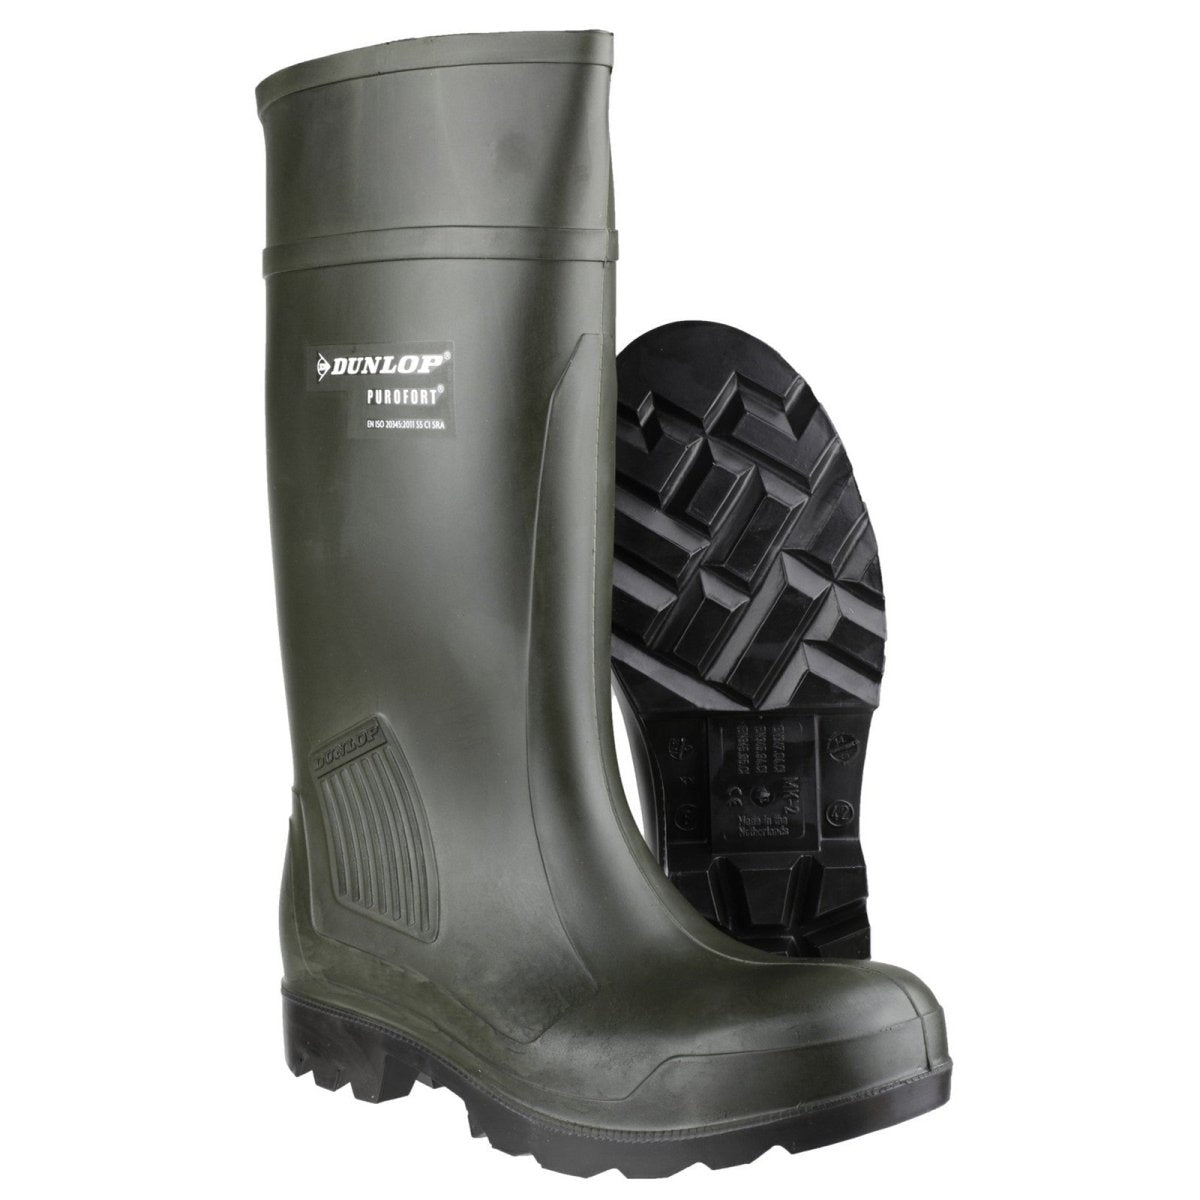 Dunlop Purofort Professional Full Safety Wellington Boots - Shoe Store Direct